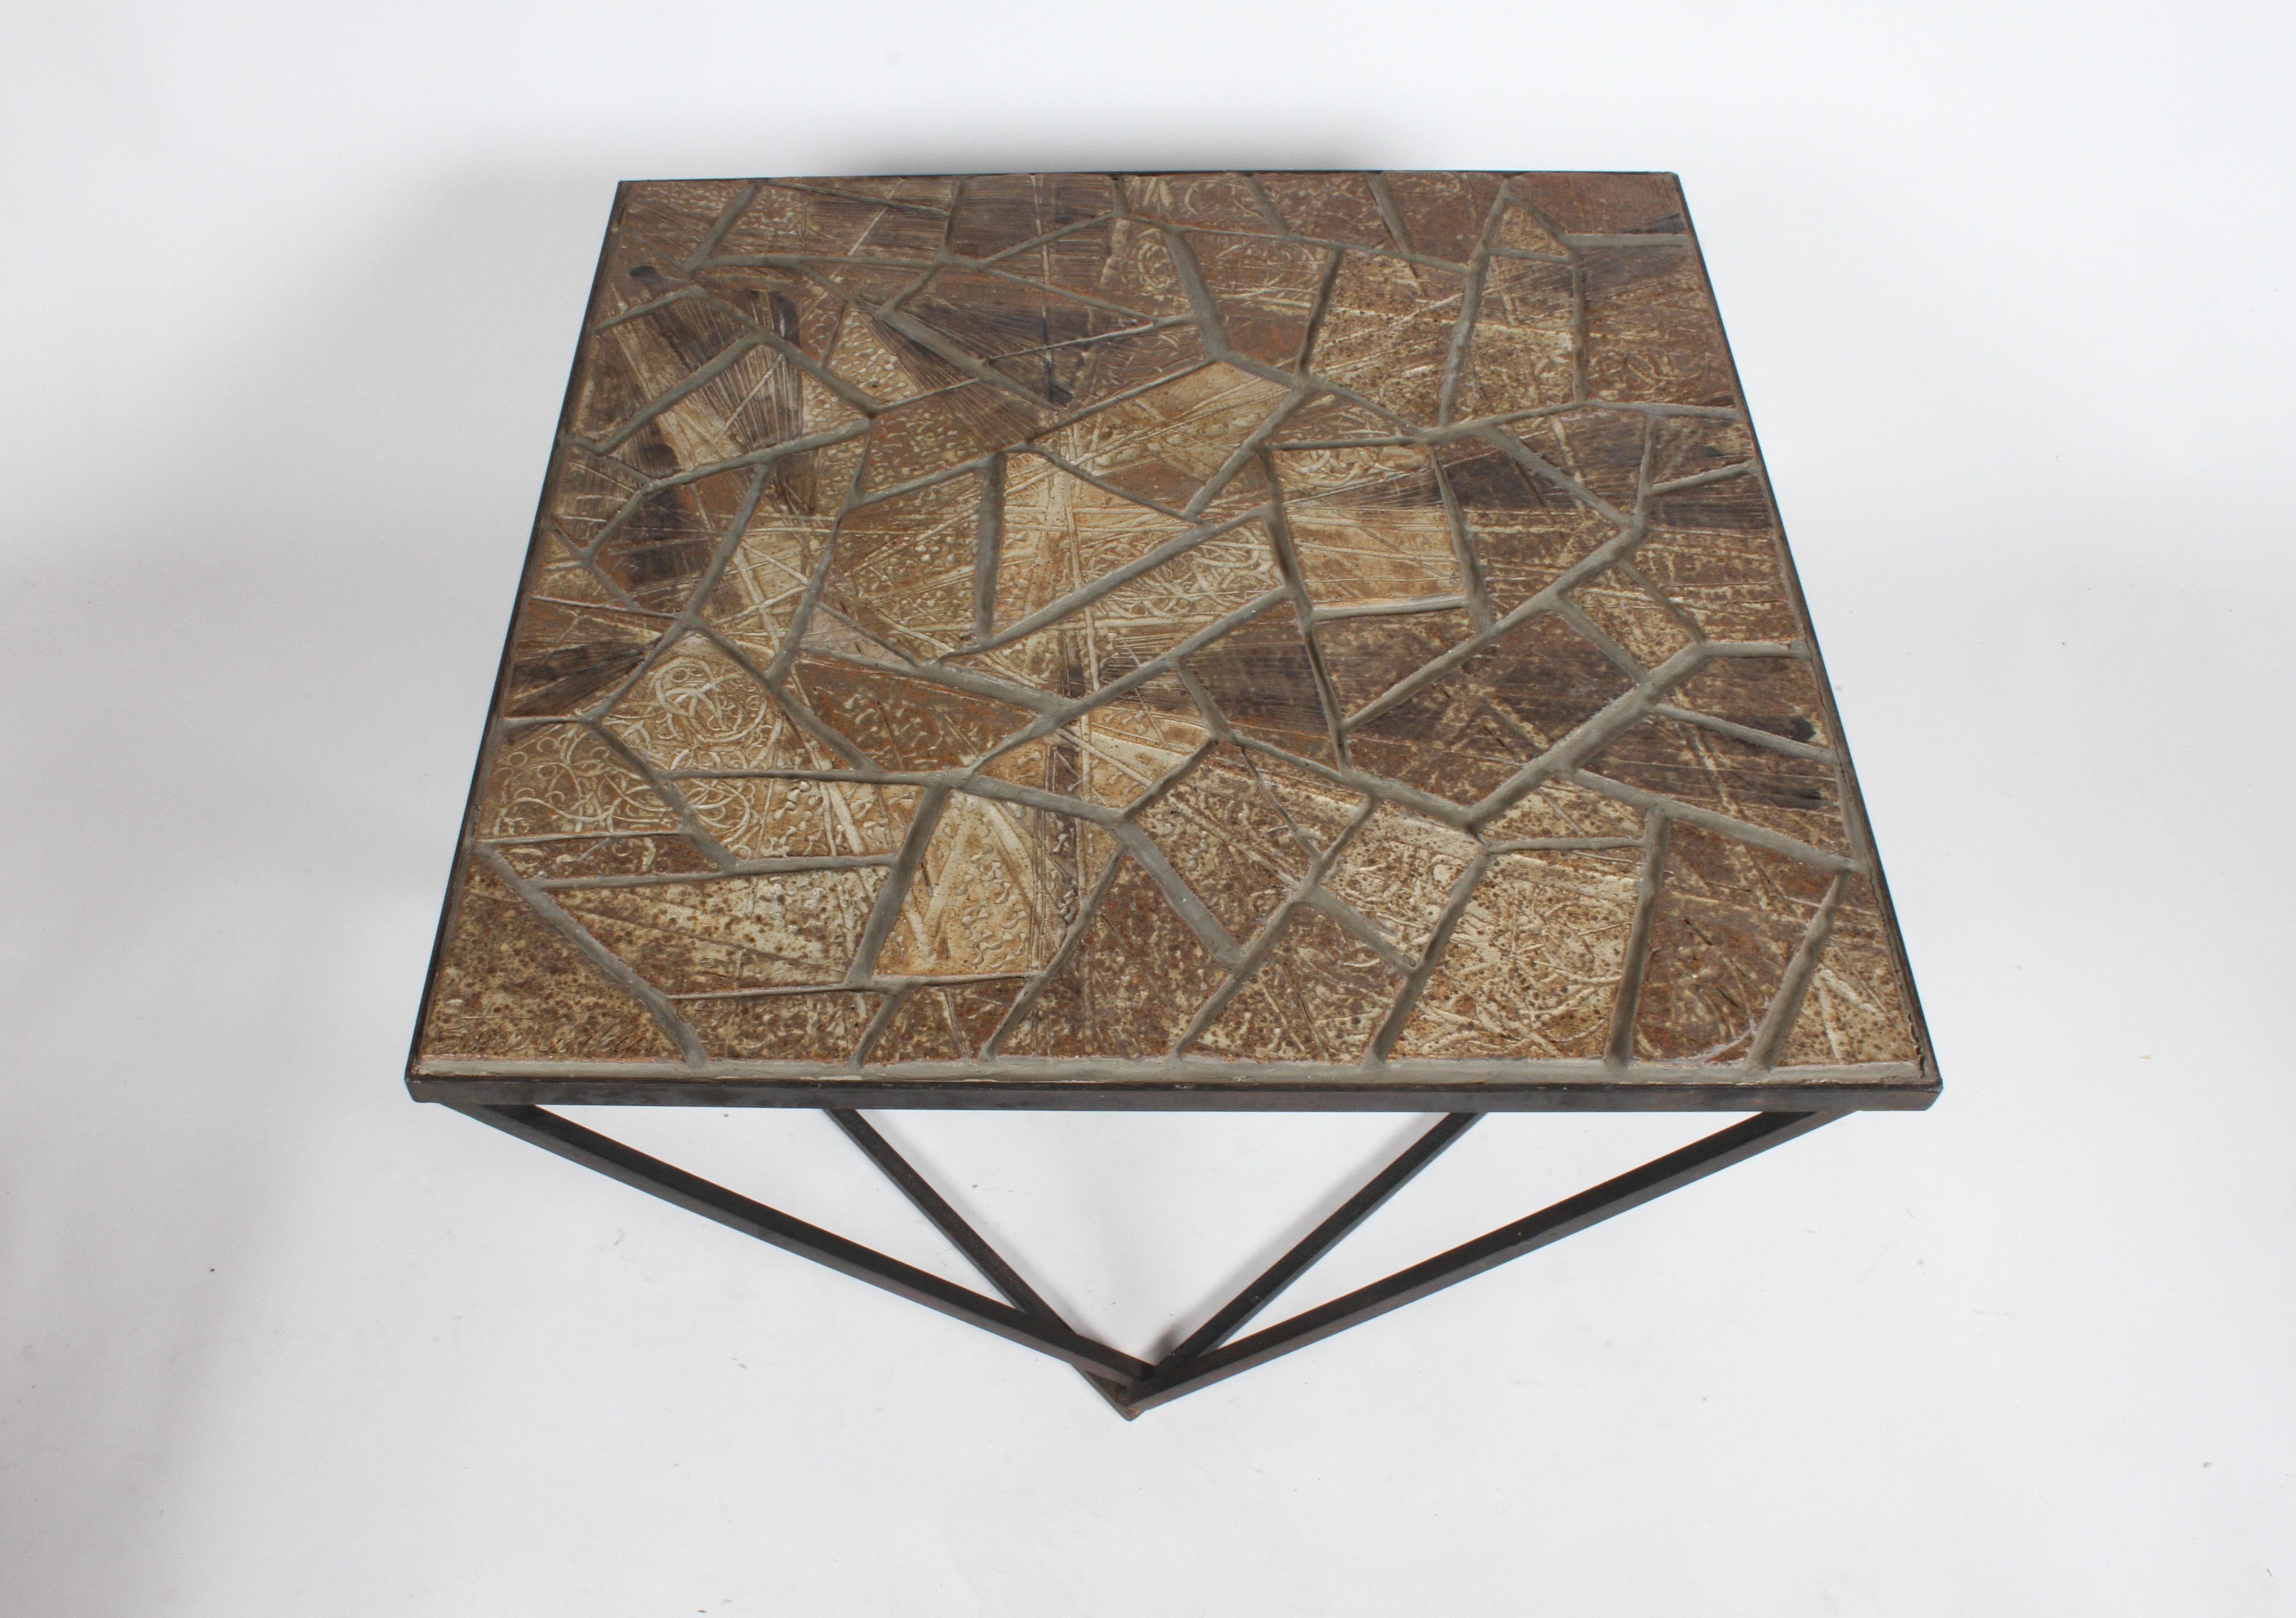 J. Ormond Sanderson Straw Valley Pottery Mid-Century Modern Cubist Coffee Table  For Sale 4